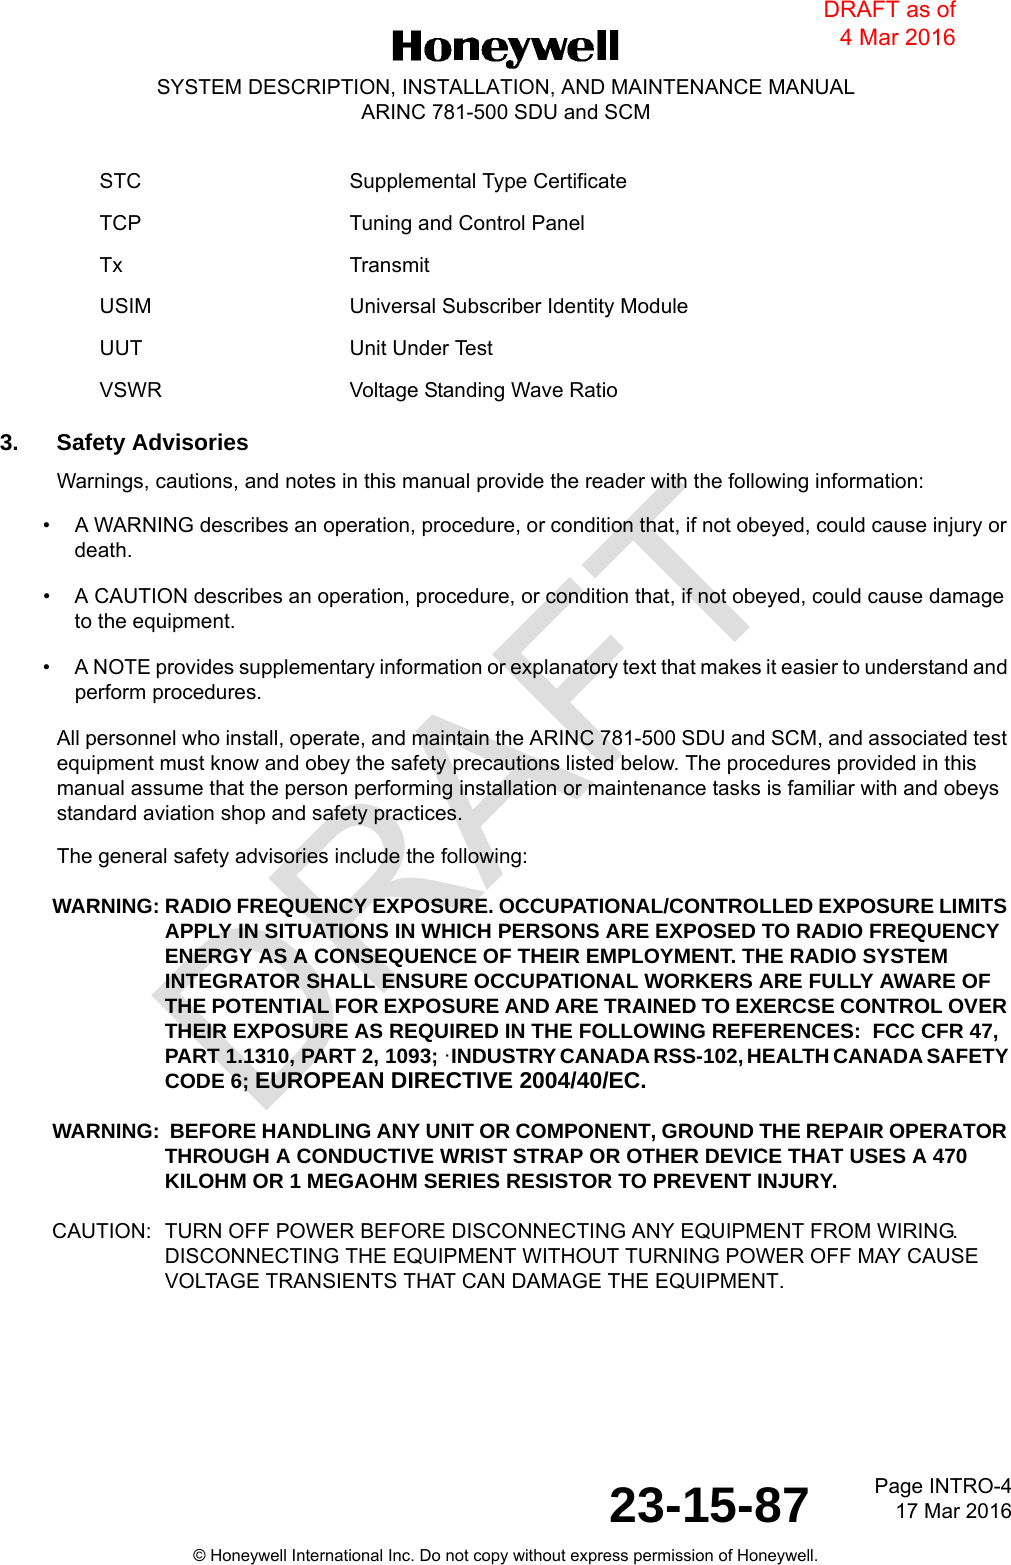 DRAFTPage INTRO-417 Mar 201623-15-87© Honeywell International Inc. Do not copy without express permission of Honeywell.SYSTEM DESCRIPTION, INSTALLATION, AND MAINTENANCE MANUALARINC 781-500 SDU and SCM3. Safety AdvisoriesWarnings, cautions, and notes in this manual provide the reader with the following information: • A WARNING describes an operation, procedure, or condition that, if not obeyed, could cause injury or death. • A CAUTION describes an operation, procedure, or condition that, if not obeyed, could cause damage to the equipment. • A NOTE provides supplementary information or explanatory text that makes it easier to understand and perform procedures.All personnel who install, operate, and maintain the ARINC 781-500 SDU and SCM, and associated test equipment must know and obey the safety precautions listed below. The procedures provided in this manual assume that the person performing installation or maintenance tasks is familiar with and obeys standard aviation shop and safety practices.The general safety advisories include the following:WARNING: RADIO FREQUENCY EXPOSURE. OCCUPATIONAL/CONTROLLED EXPOSURE LIMITS APPLY IN SITUATIONS IN WHICH PERSONS ARE EXPOSED TO RADIO FREQUENCY ENERGY AS A CONSEQUENCE OF THEIR EMPLOYMENT. THE RADIO SYSTEM INTEGRATOR SHALL ENSURE OCCUPATIONAL WORKERS ARE FULLY AWARE OF THE POTENTIAL FOR EXPOSURE AND ARE TRAINED TO EXERCSE CONTROL OVER THEIR EXPOSURE AS REQUIRED IN THE FOLLOWING REFERENCES:  FCC CFR 47, PART 1.1310, PART 2, 1093; ·INDUSTRY CANADA RSS-102, HEALTH CANADA SAFETY CODE 6; EUROPEAN DIRECTIVE 2004/40/EC.WARNING:  BEFORE HANDLING ANY UNIT OR COMPONENT, GROUND THE REPAIR OPERATOR THROUGH A CONDUCTIVE WRIST STRAP OR OTHER DEVICE THAT USES A 470KILOHM OR 1 MEGAOHM SERIES RESISTOR TO PREVENT INJURY.CAUTION: TURN OFF POWER BEFORE DISCONNECTING ANY EQUIPMENT FROM WIRING. DISCONNECTING THE EQUIPMENT WITHOUT TURNING POWER OFF MAY CAUSE VOLTAGE TRANSIENTS THAT CAN DAMAGE THE EQUIPMENT.STC Supplemental Type CertificateTCP Tuning and Control PanelTx TransmitUSIM Universal Subscriber Identity ModuleUUT Unit Under TestVSWR Voltage Standing Wave RatioDRAFT as of 4 Mar 2016